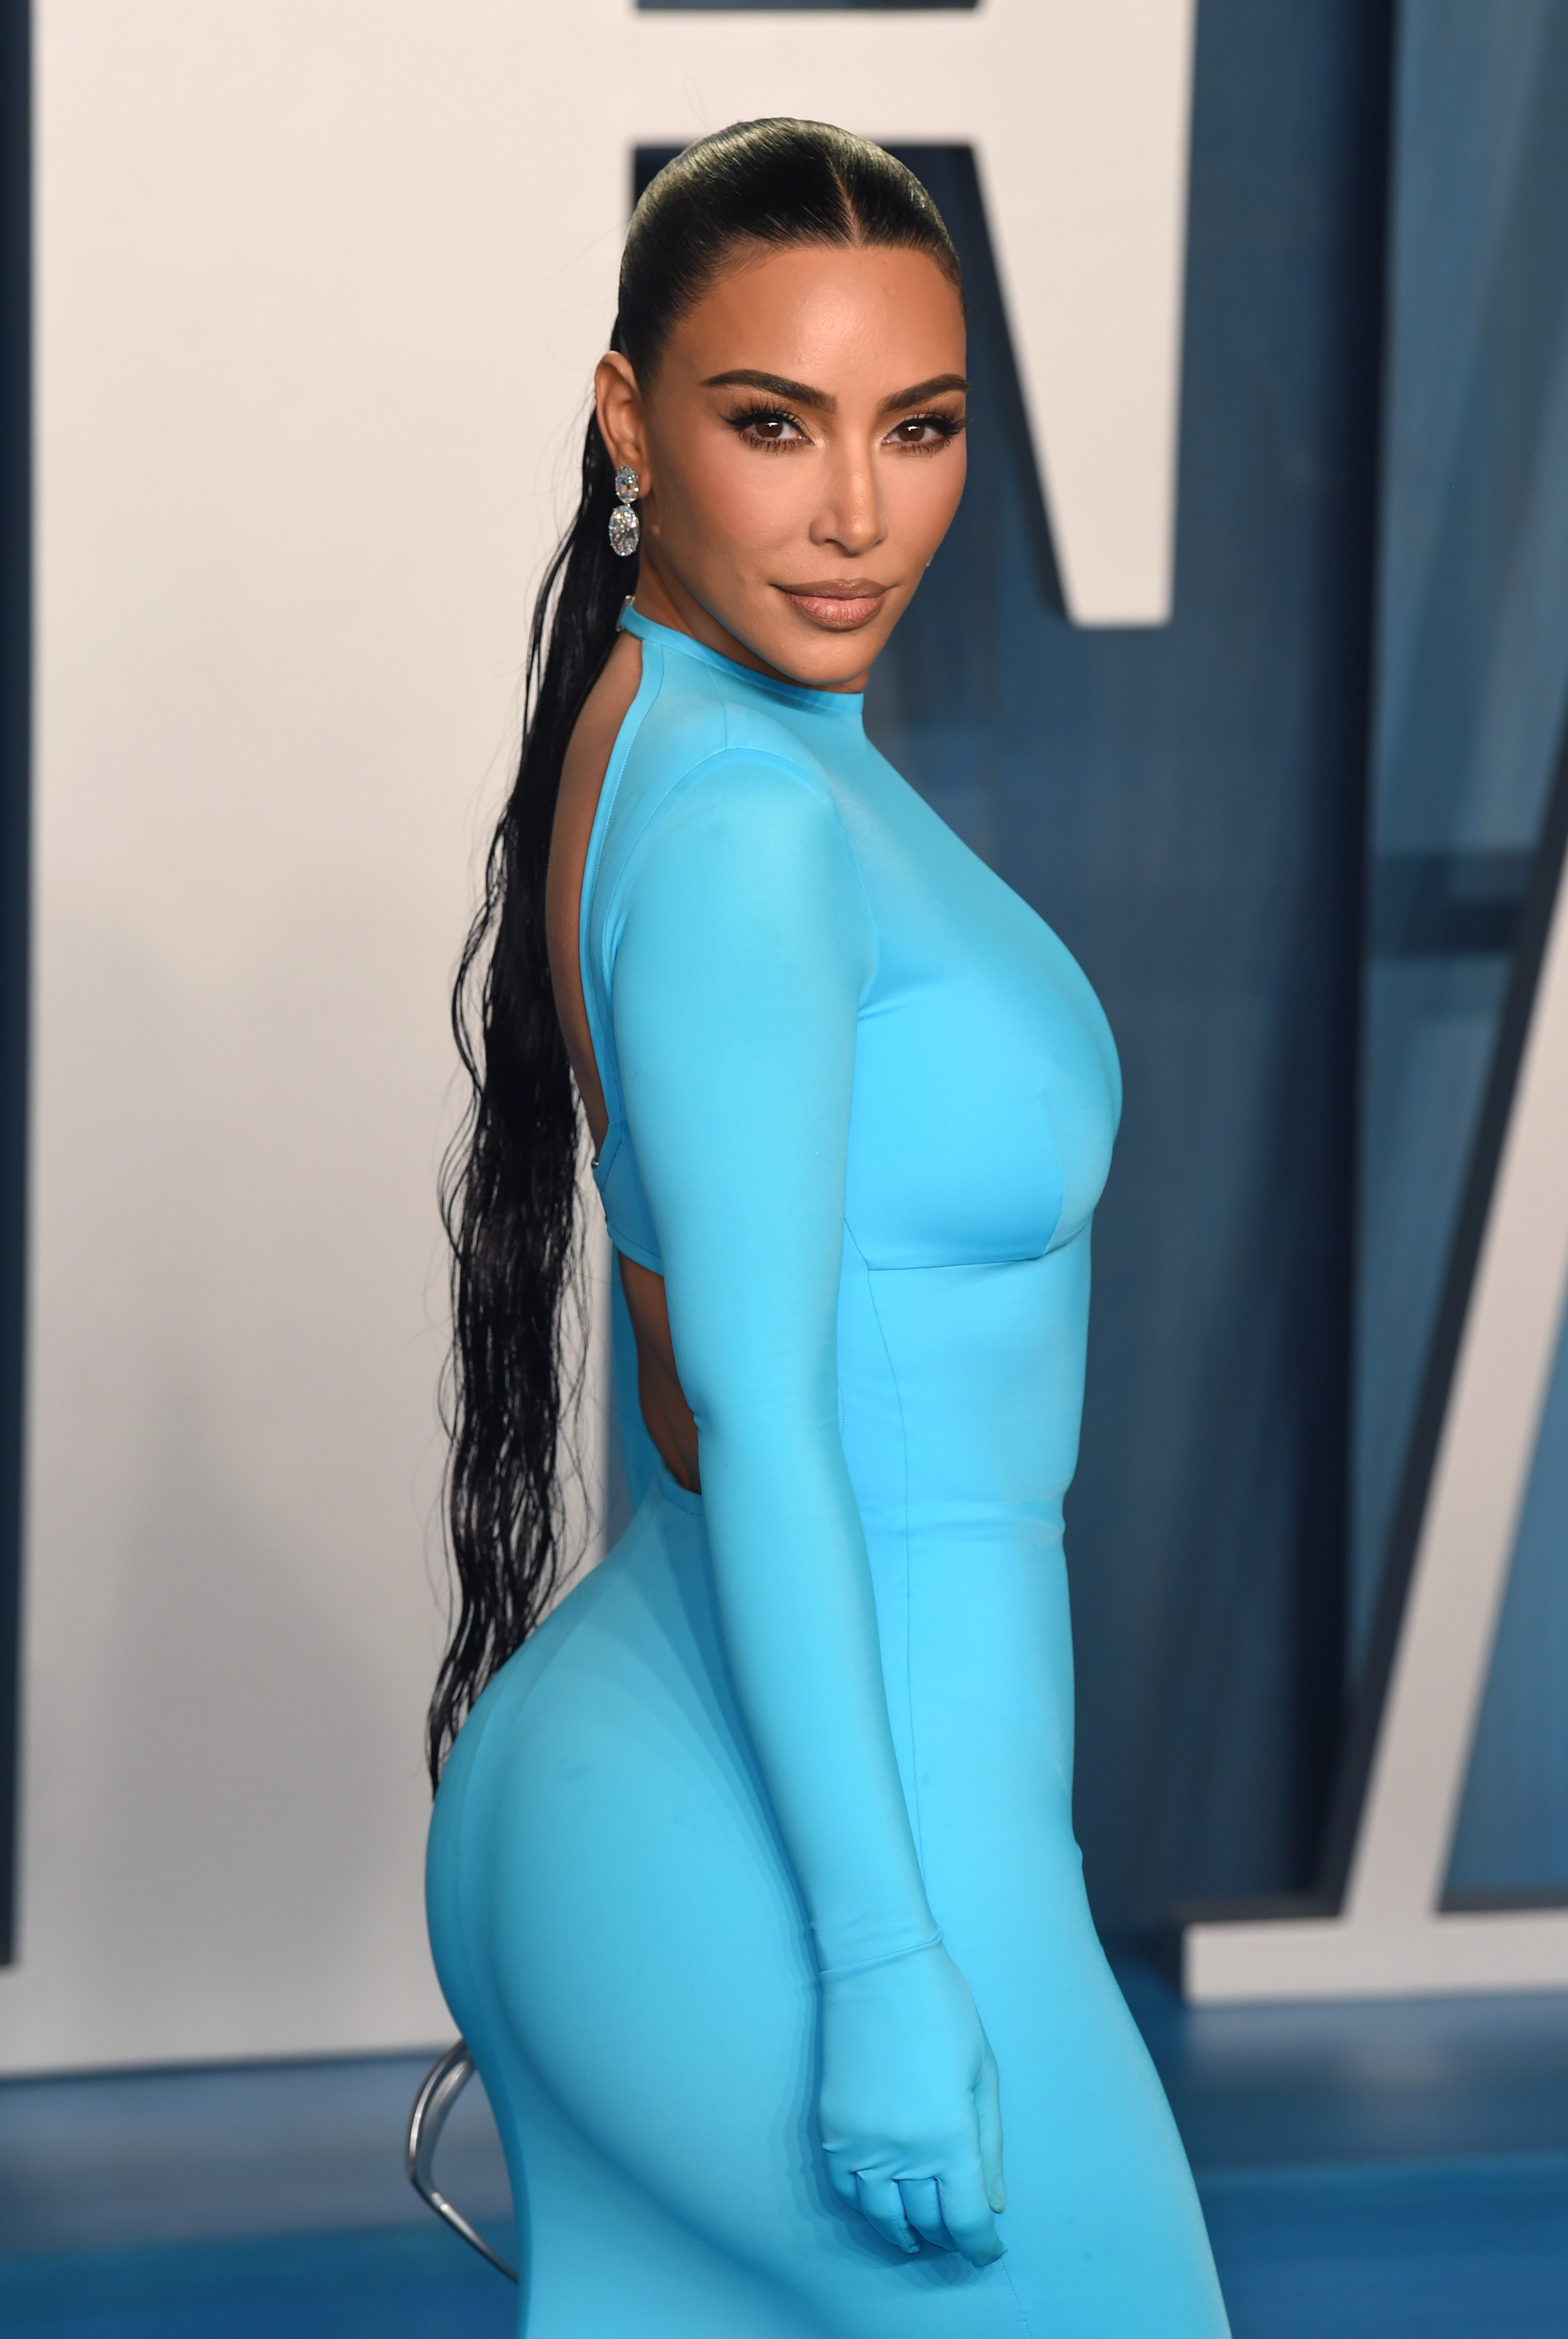 Kim in a bodycon outfit at a red carpet event